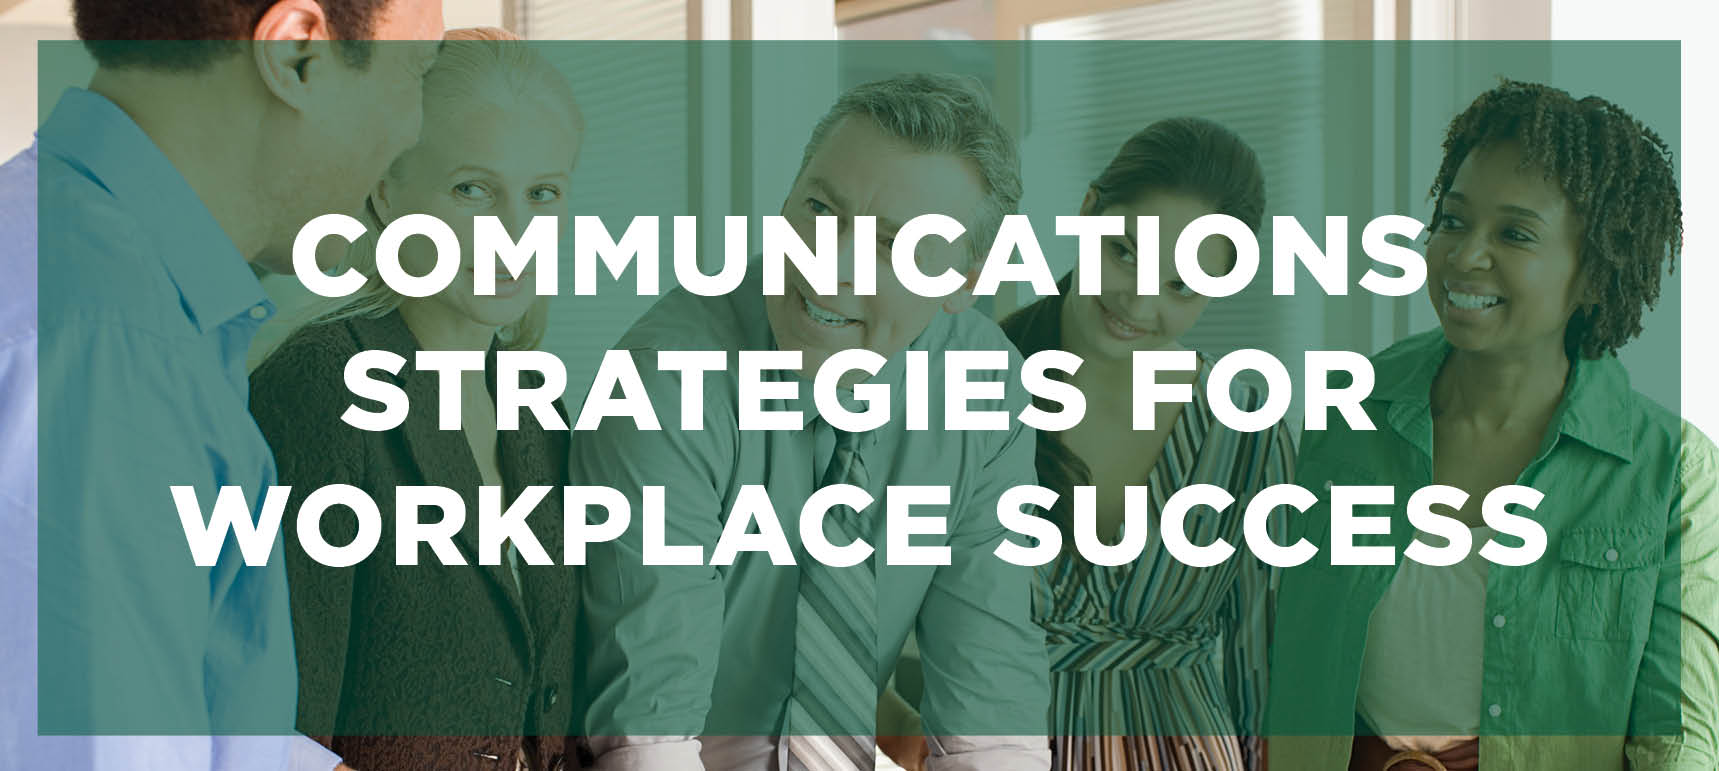 Learn more about the Communications Strategies for Workplace Success program